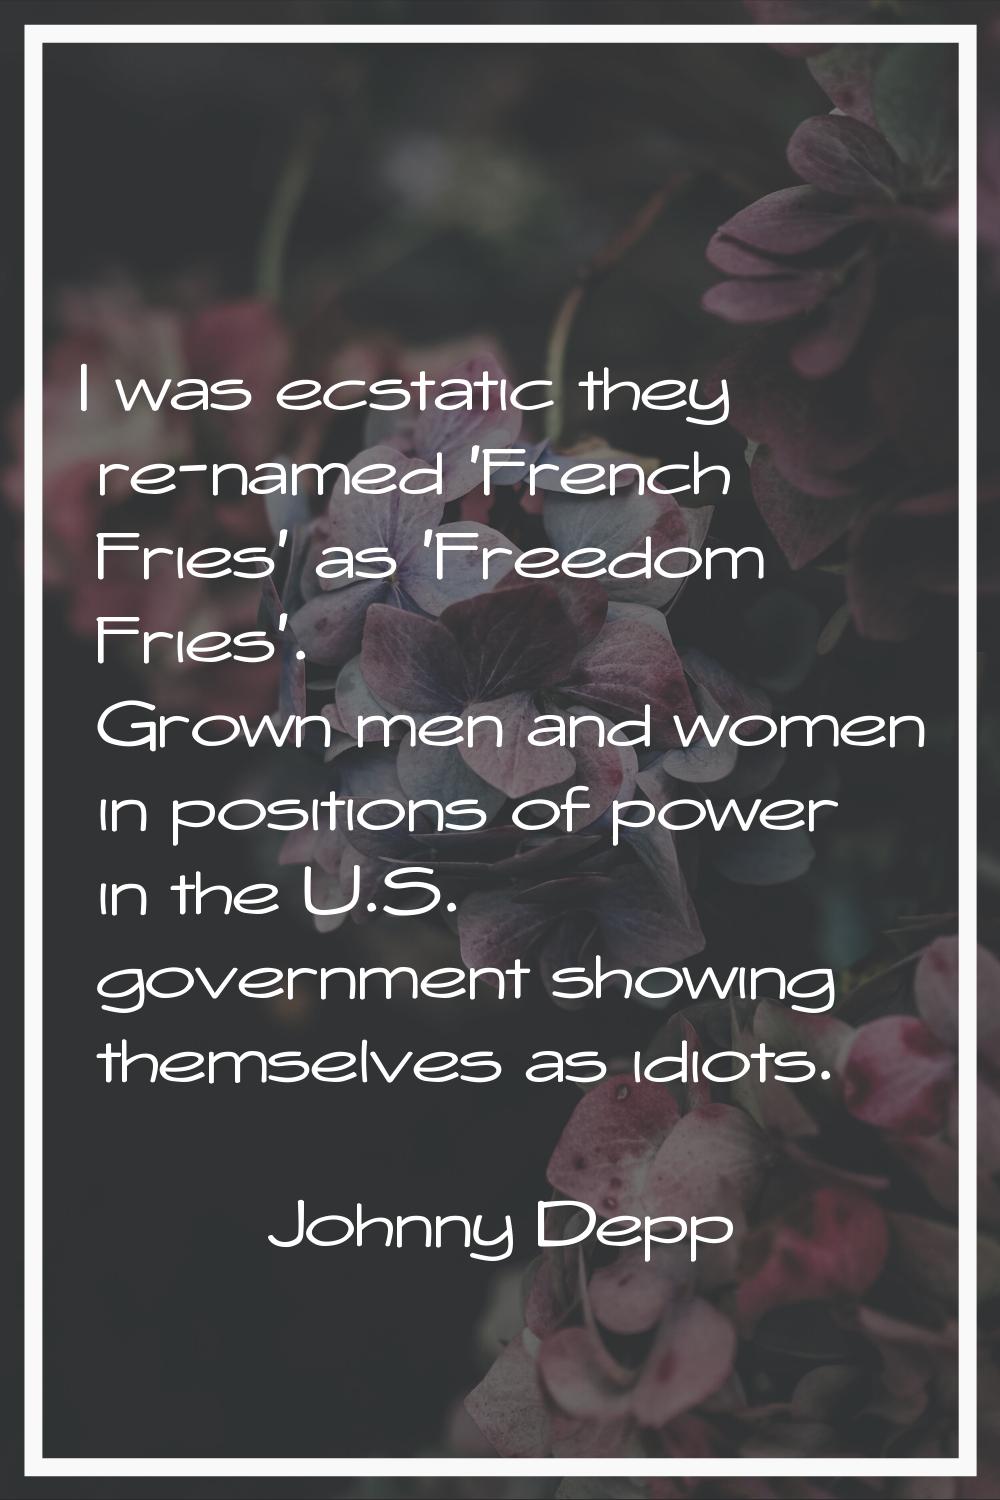 I was ecstatic they re-named 'French Fries' as 'Freedom Fries'. Grown men and women in positions of